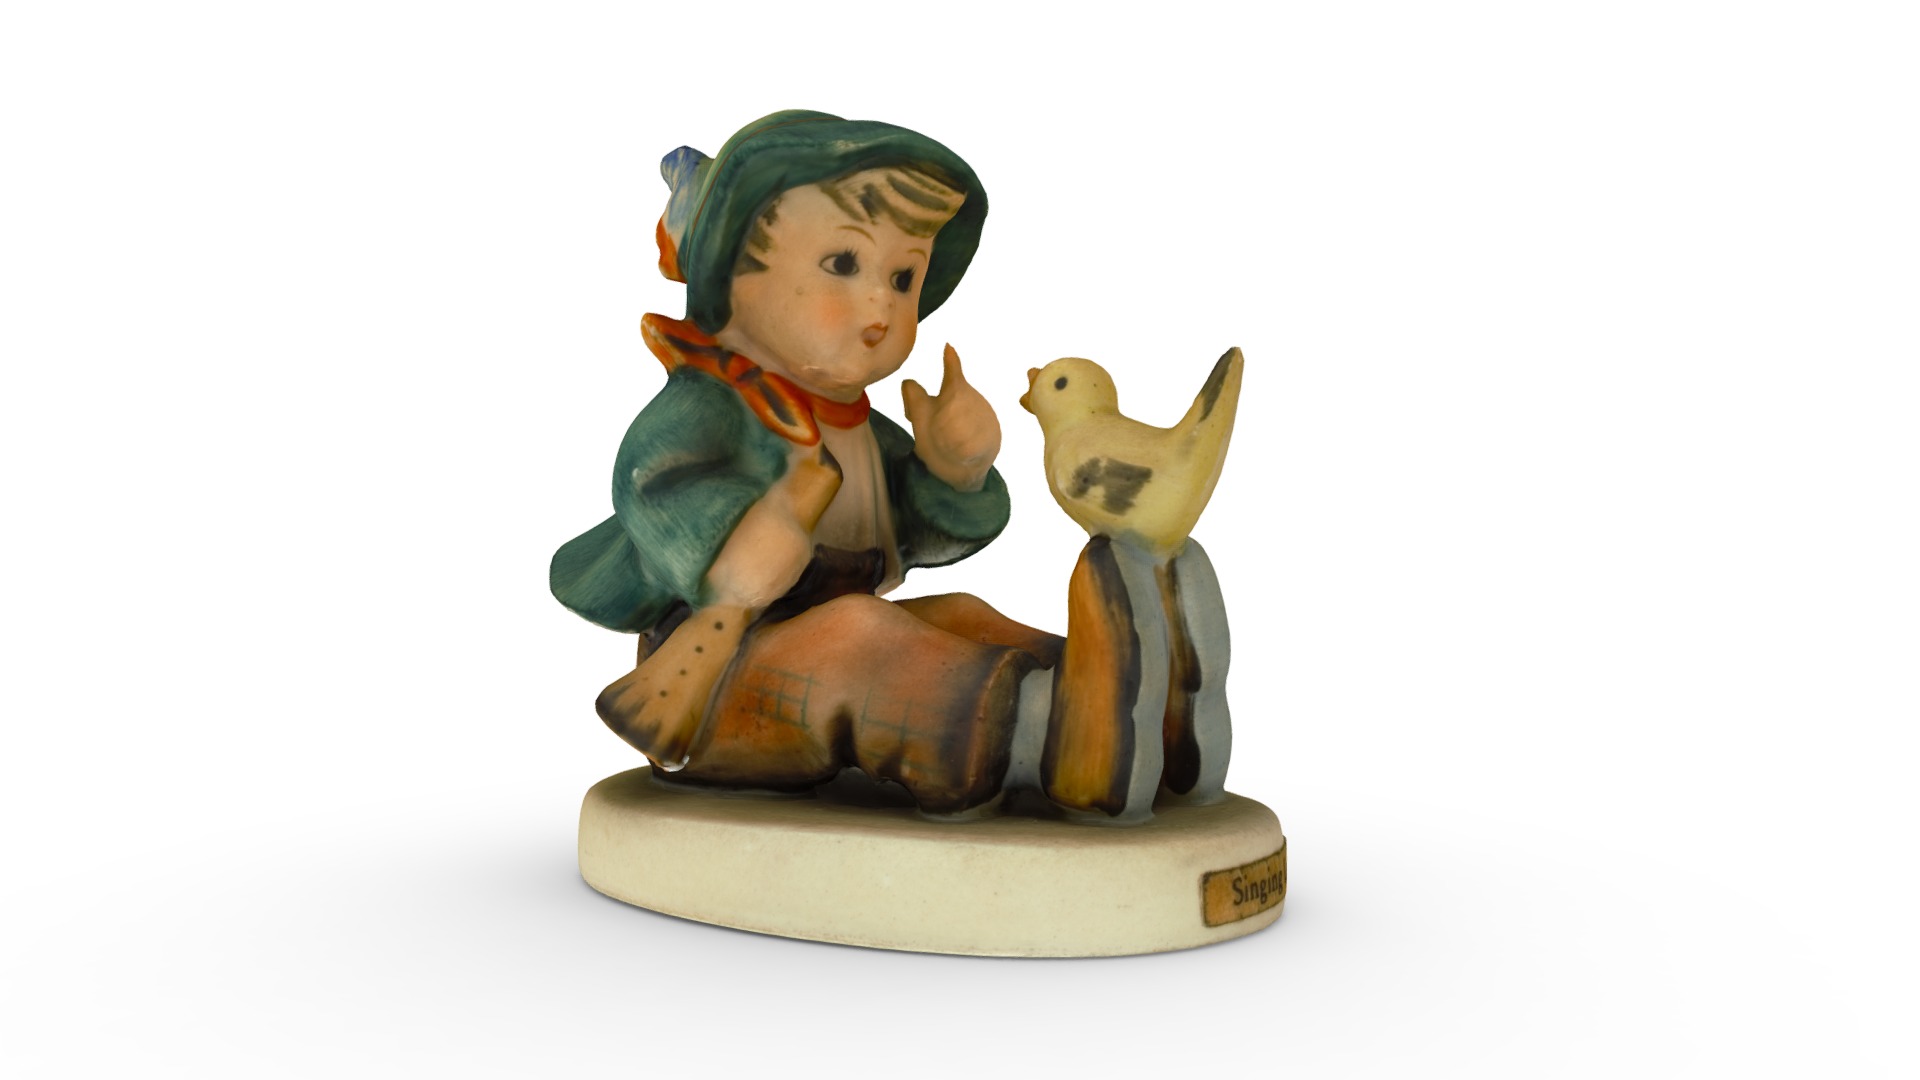 3D model Hummel Singing Lessons - This is a 3D model of the Hummel Singing Lessons. The 3D model is about a figurine of a boy holding a hammer.